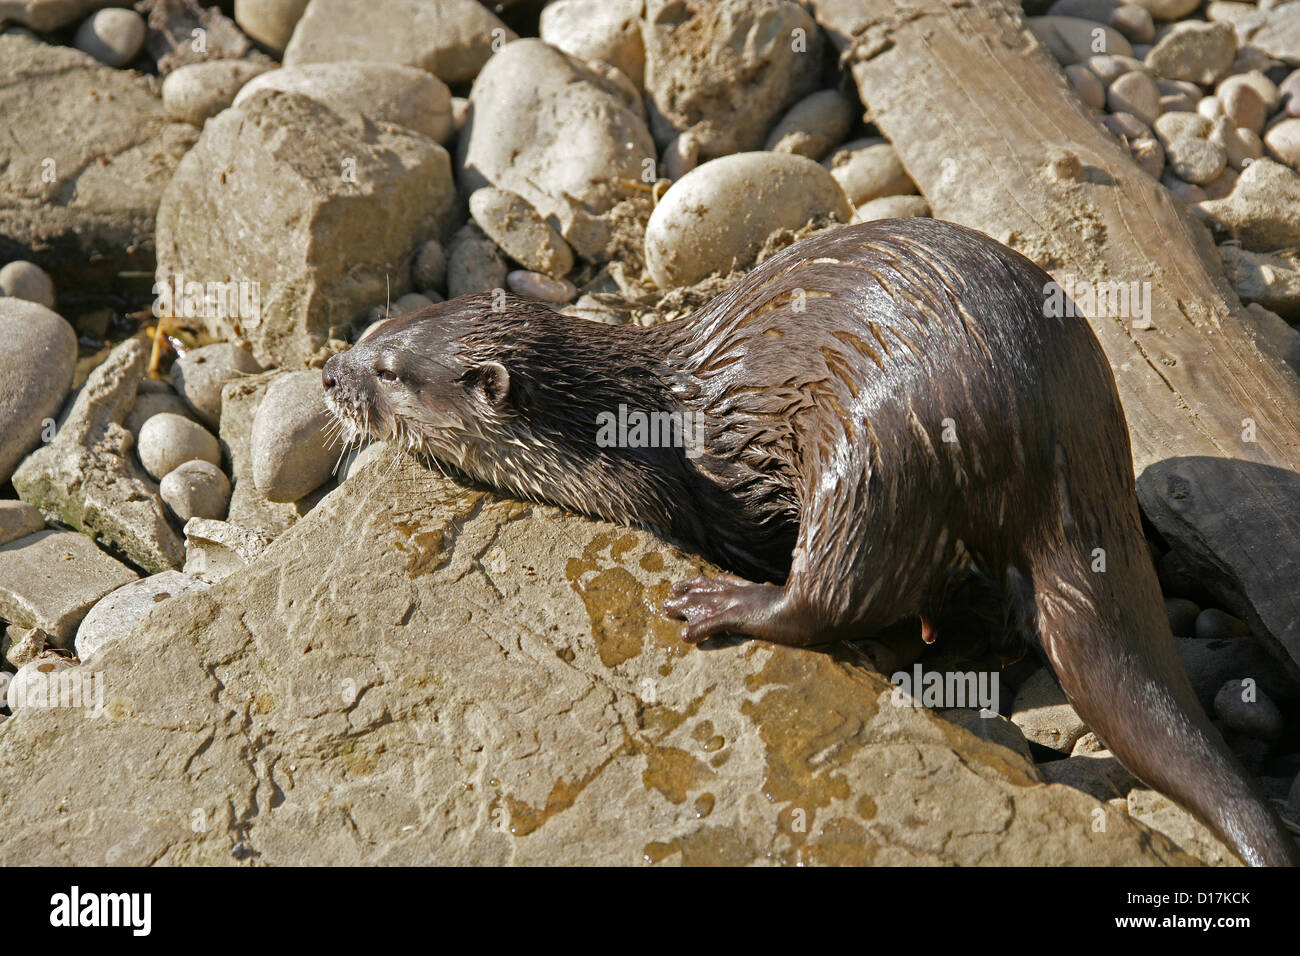 The Eurasian Otter, Lutra lutra, Mustelidae. Native to Europe, North Africa and most of Asia. Stock Photo